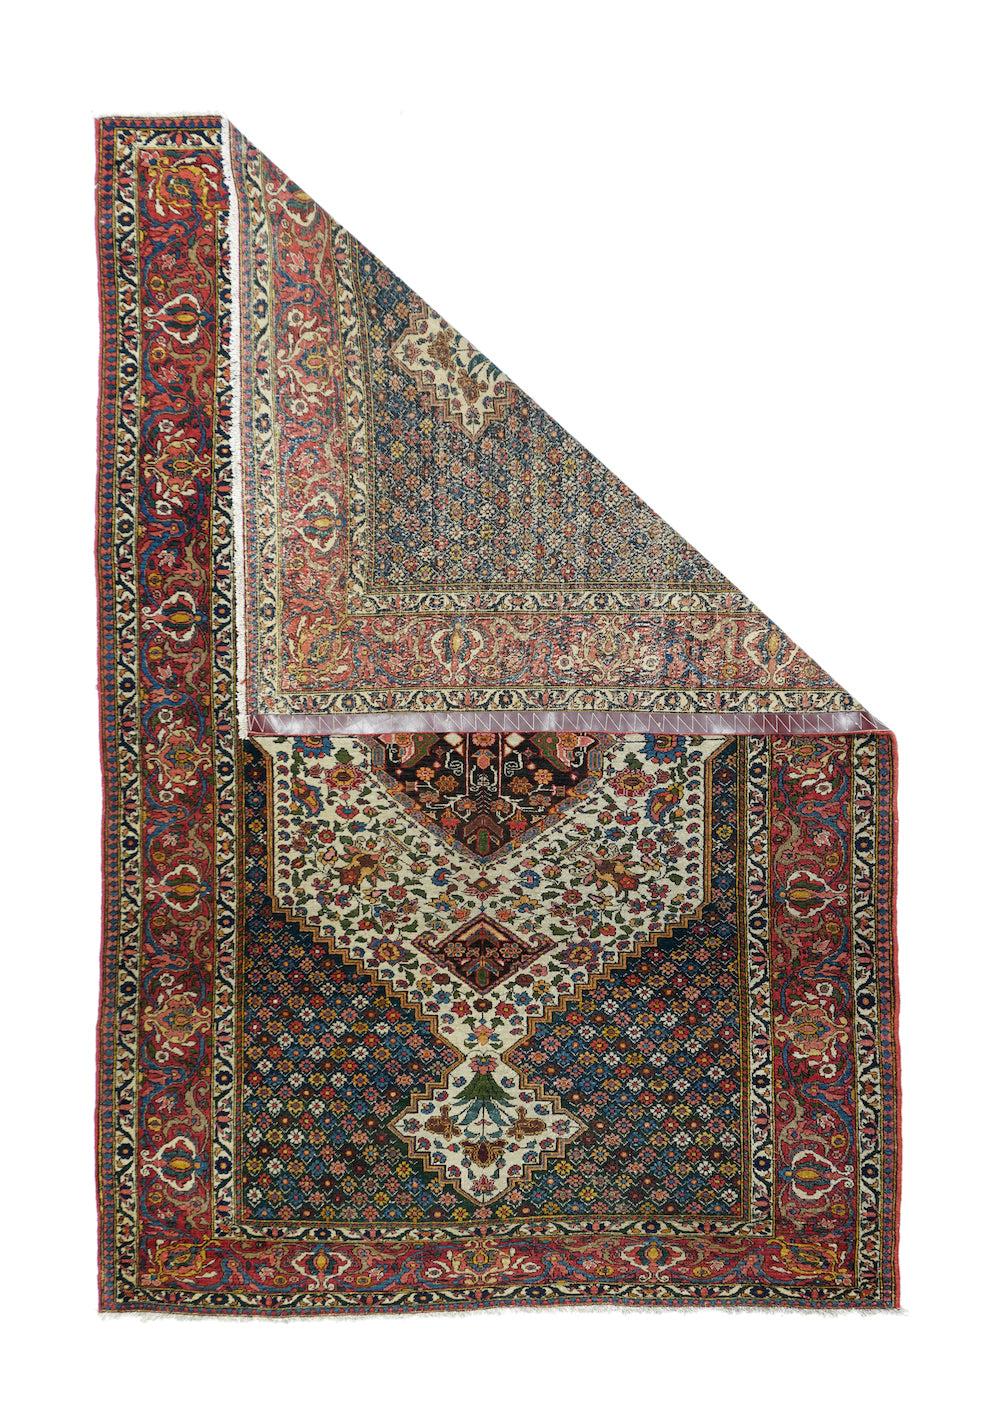 This is a well-woven sacatter from the vllagers in the Chahar Mahal district in central Persia. These rugs are often called “Bakhtiari”, although these latter weave mostly bags and not pile rugs. The navy ground is closely covered by tiny flowers